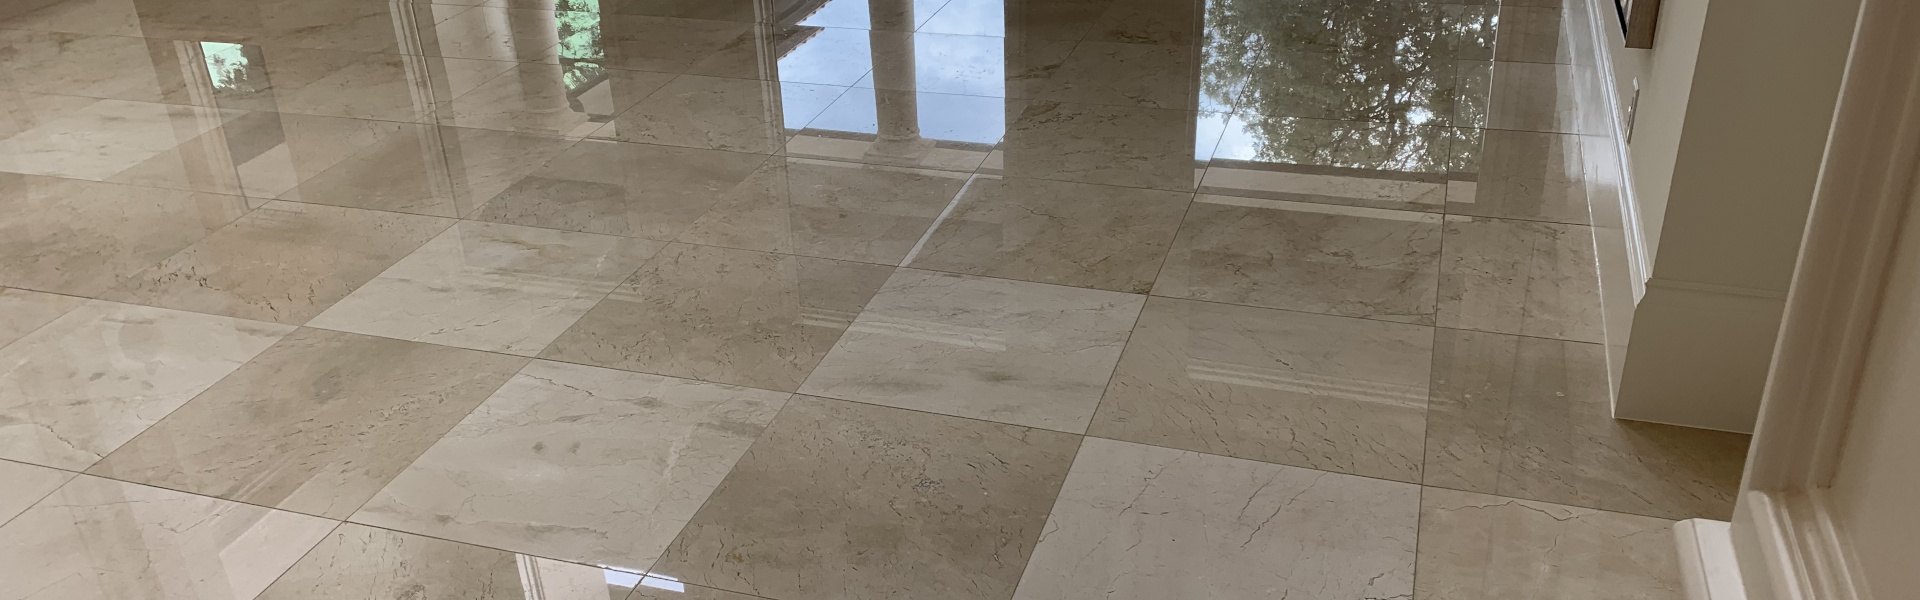 How to Keep Your Travertine Floor in Good Condition: Tips for Cleaning, Sealing, and Repair